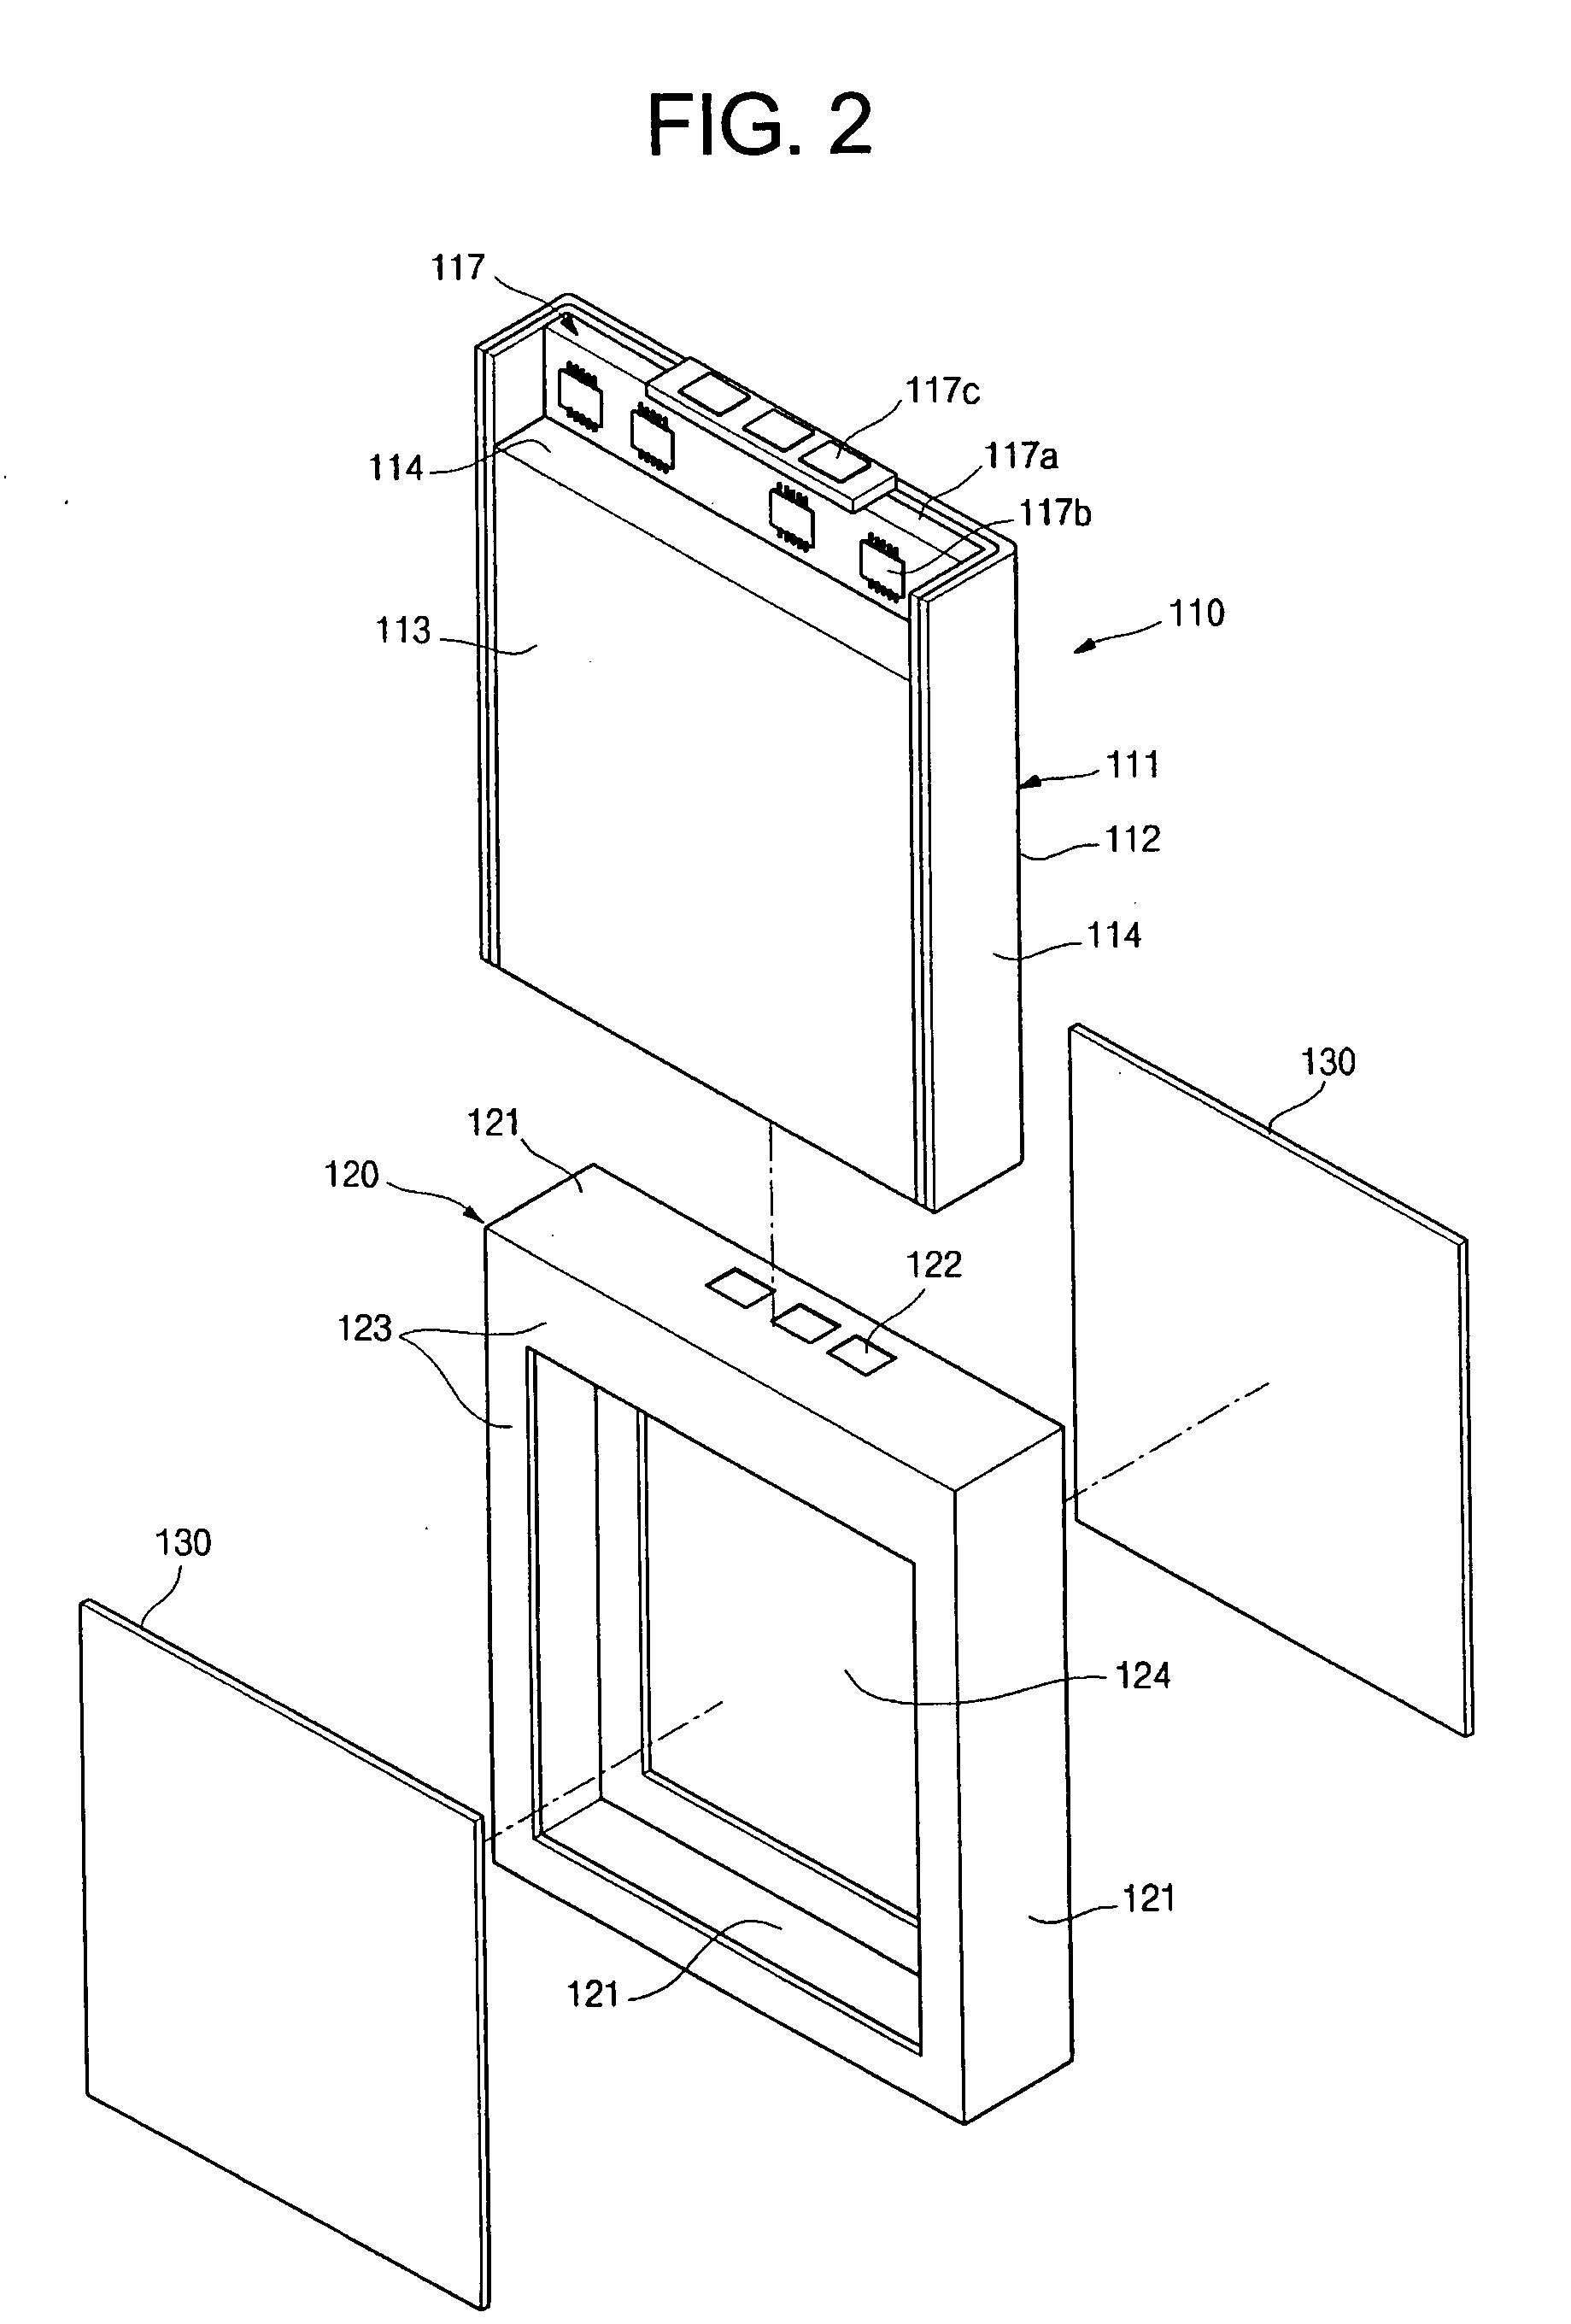 Polymer battery pack and method of manufacturing the same